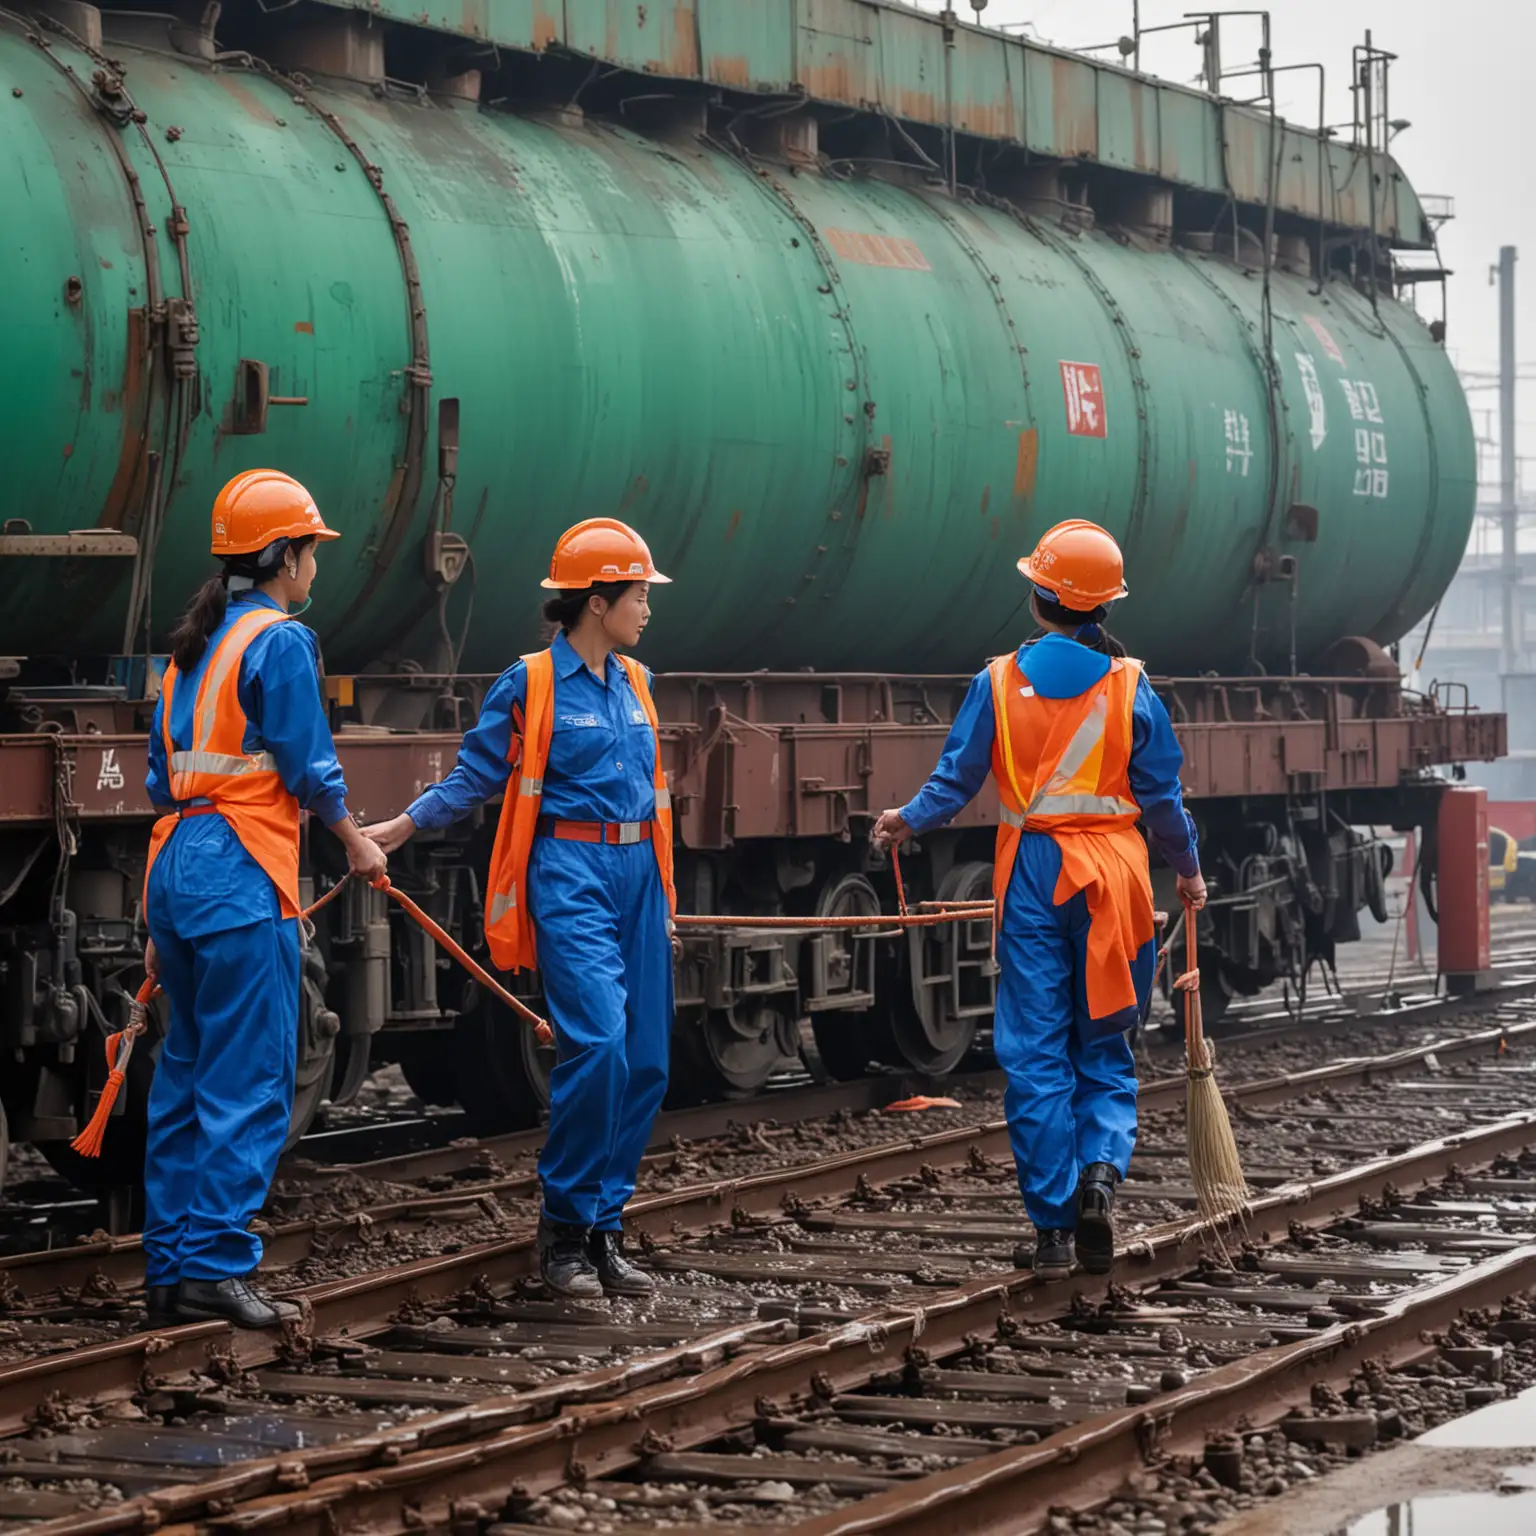 Chinese women workers on railway car wash platform. The scene shows three women, approximately fifty years old, wearing blue work clothes, red high-visibility safety belts for overhead operations, orange-red hard hats, and black labor shoes. They are lined up in a row, one standing on an oil tanker, cleaning the inside of the oil tank with a long mop while sweating profusely. The oil tanker is located in a wash bay with a green top canopy and two layers. The women are working on the second level. Here's your requested photo description.